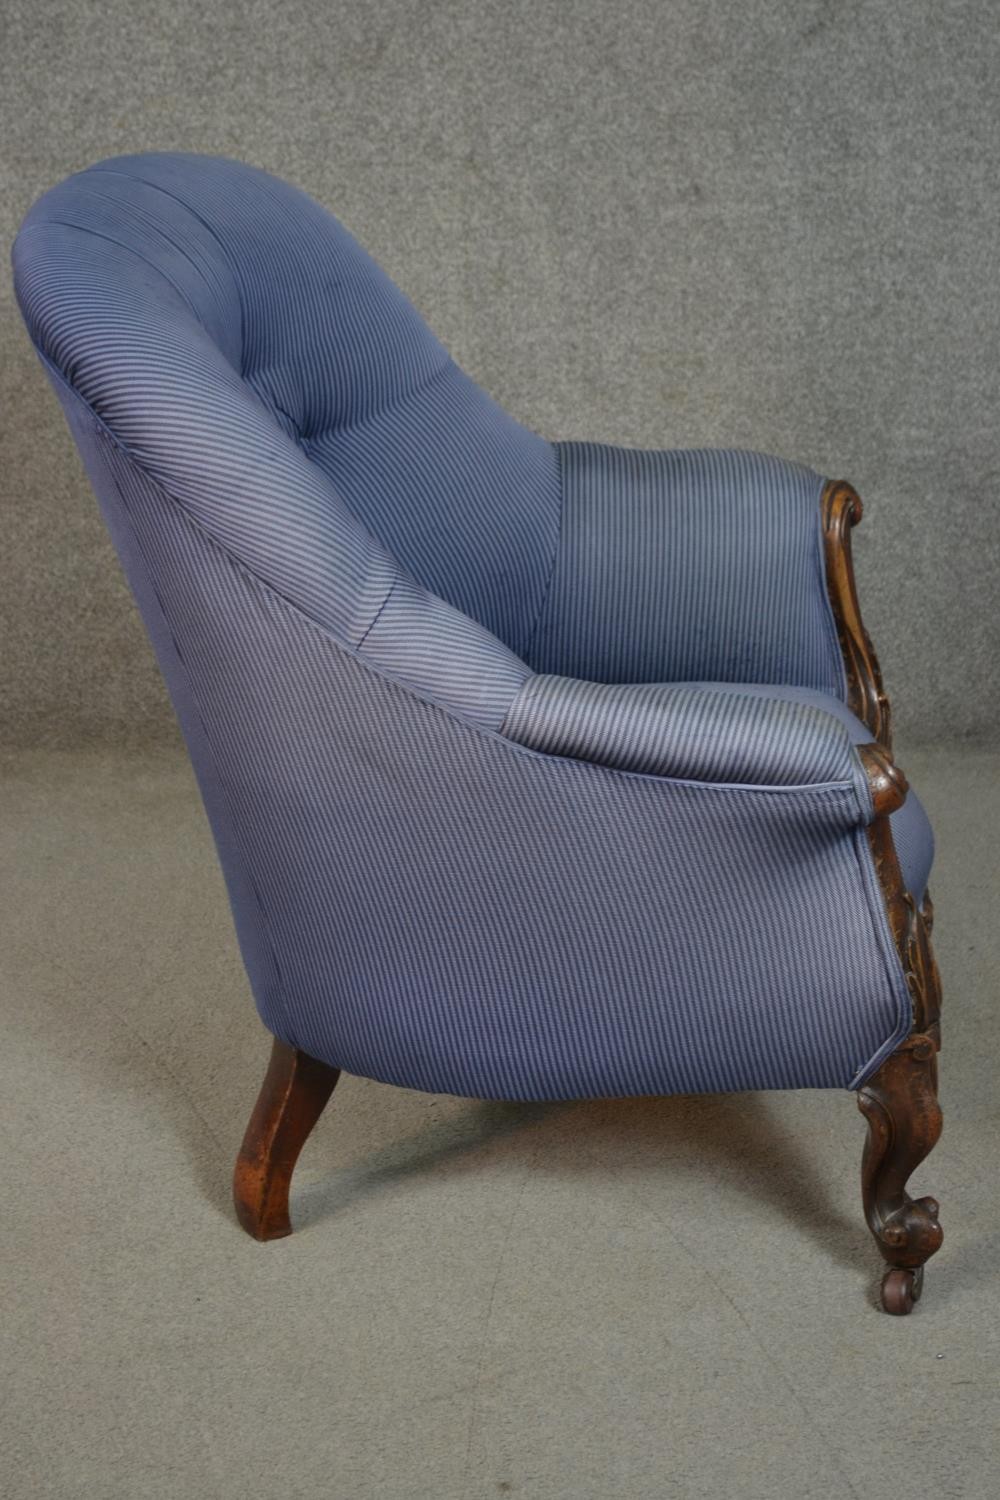 A circa 1830s mahogany tub armchair, upholstered in striped blue fabric, with a button back, the - Image 3 of 7